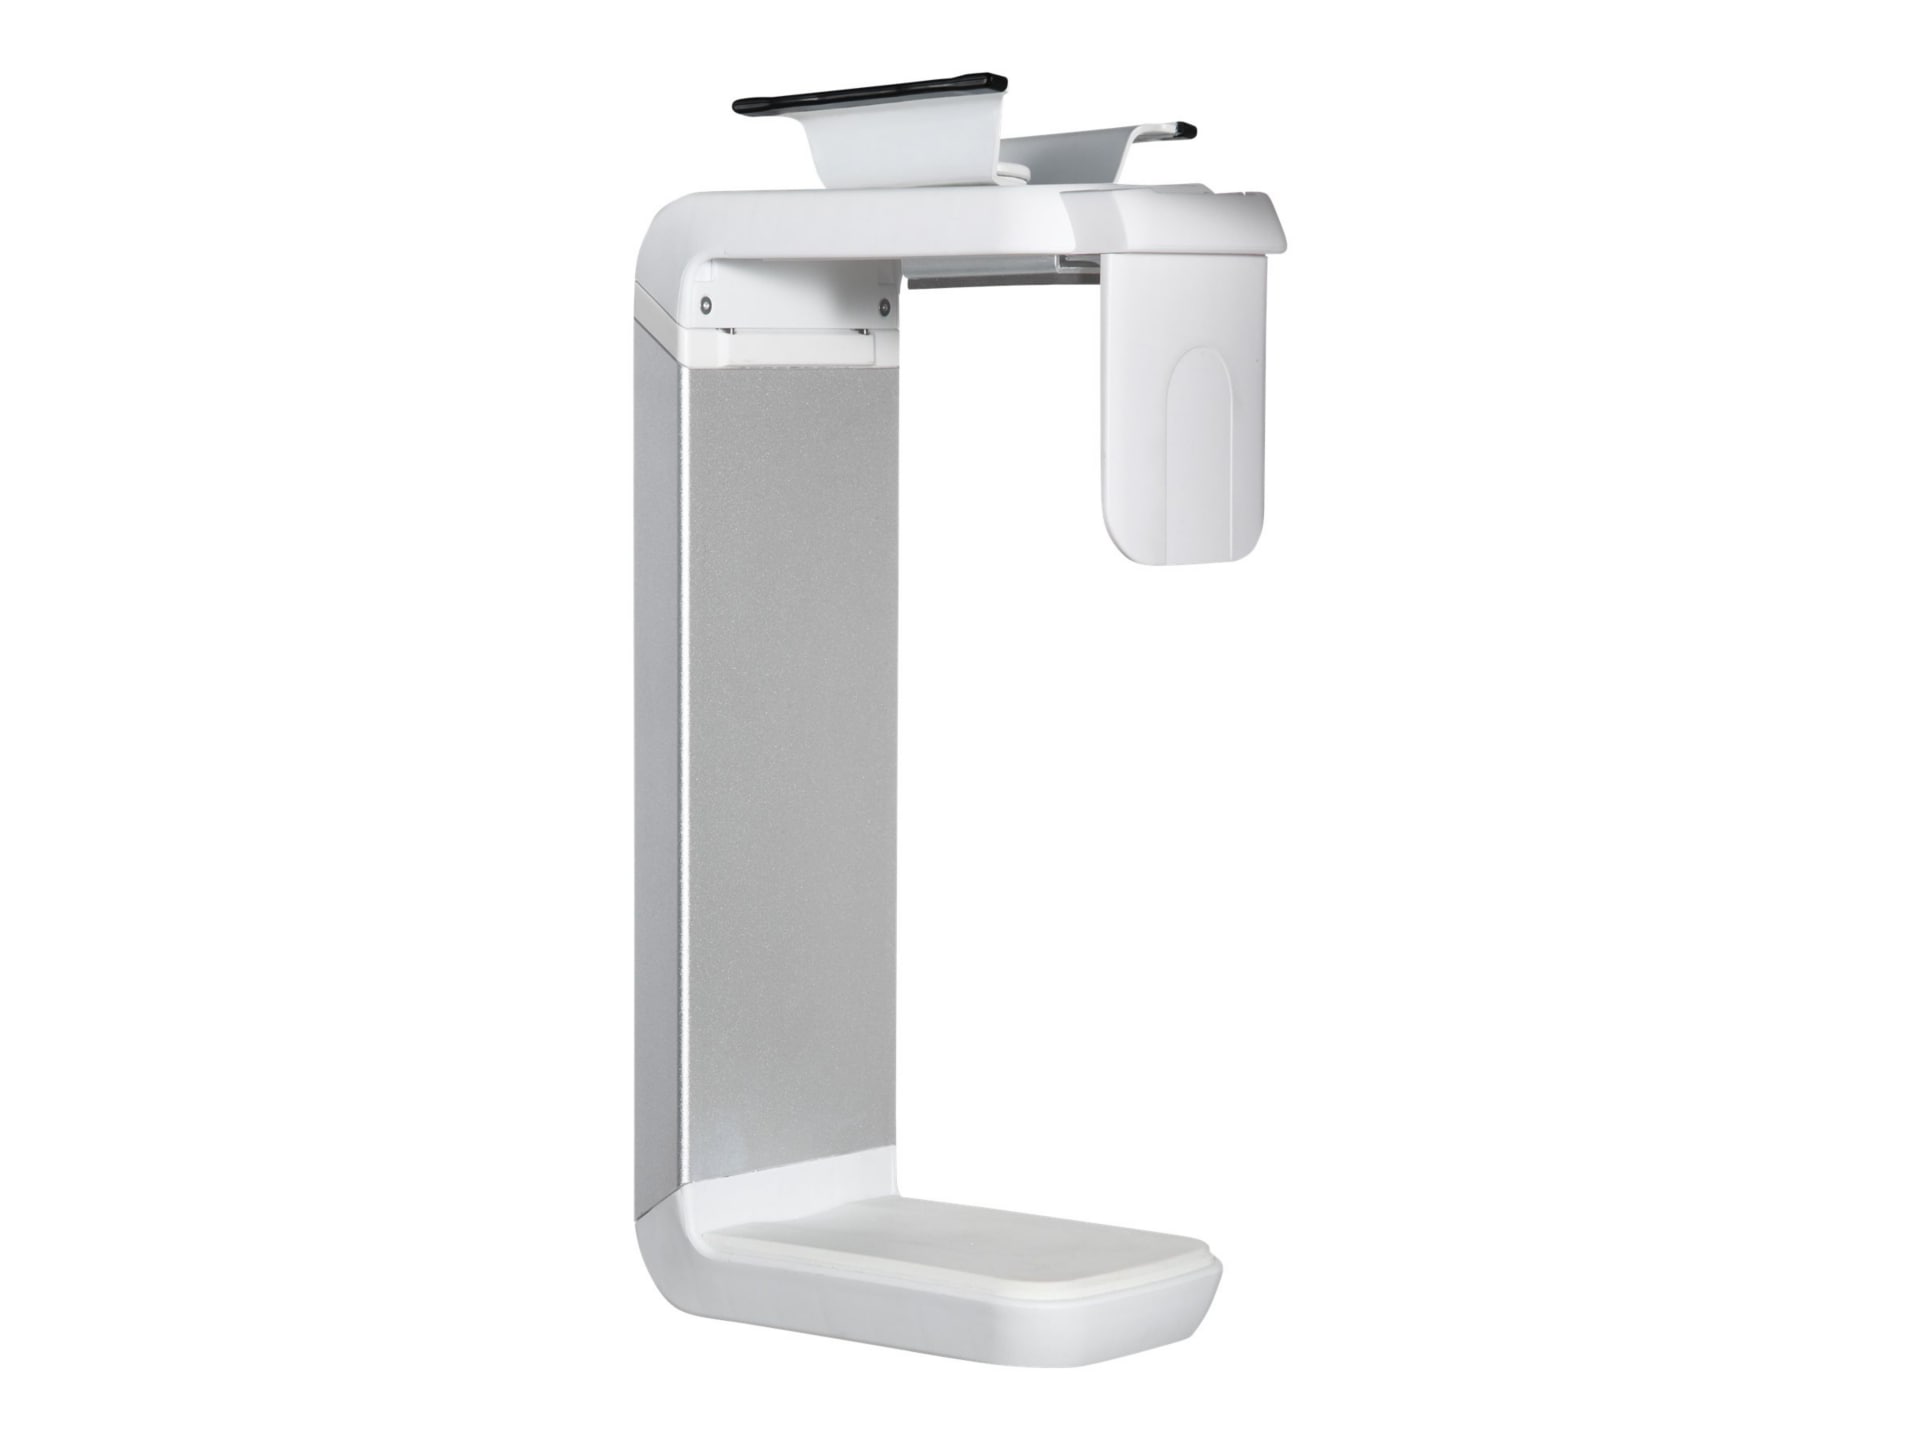 Humanscale CPU600 - system unit holder